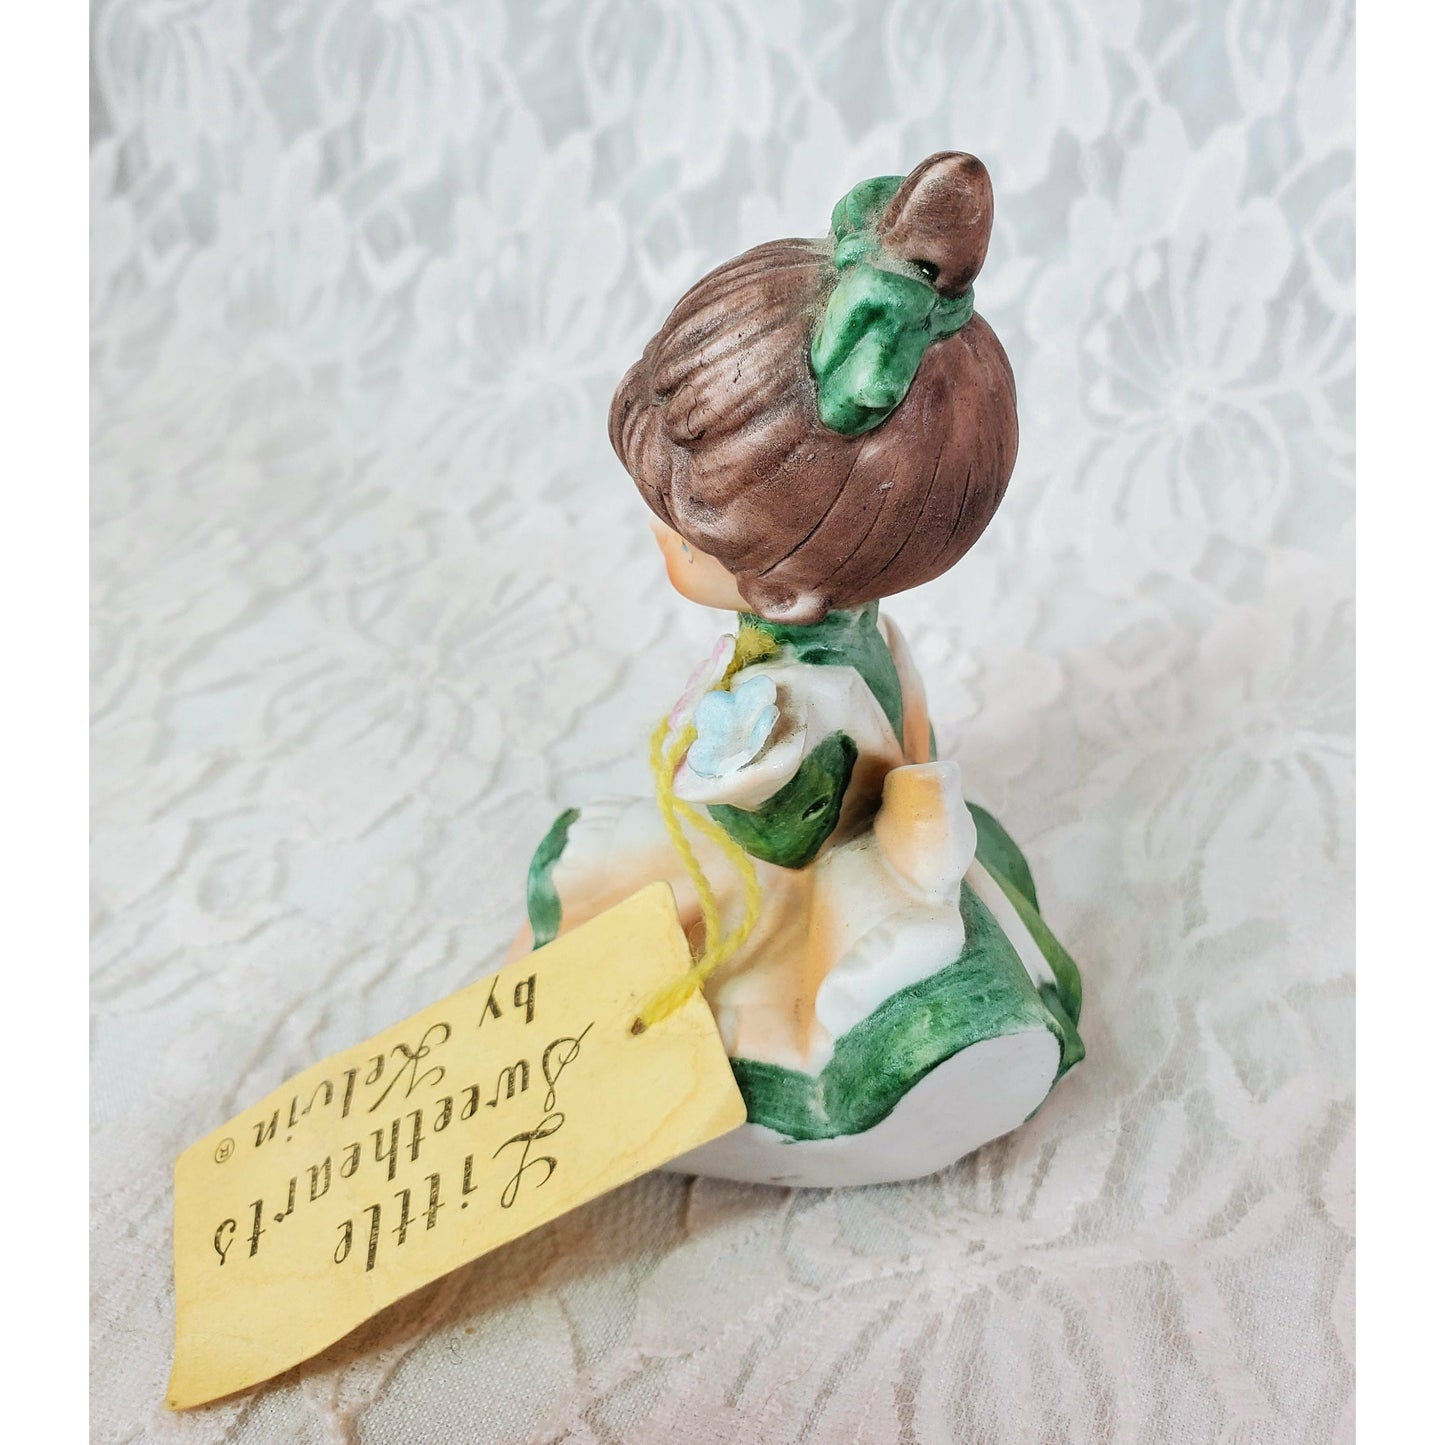 RARE Vintage 1962 Porcelain Little Sweethearts By Kelvin Figurine with ORIGINAL Tag ~ Numbered B-873 ~ Girl Sitting & Holding Flowers